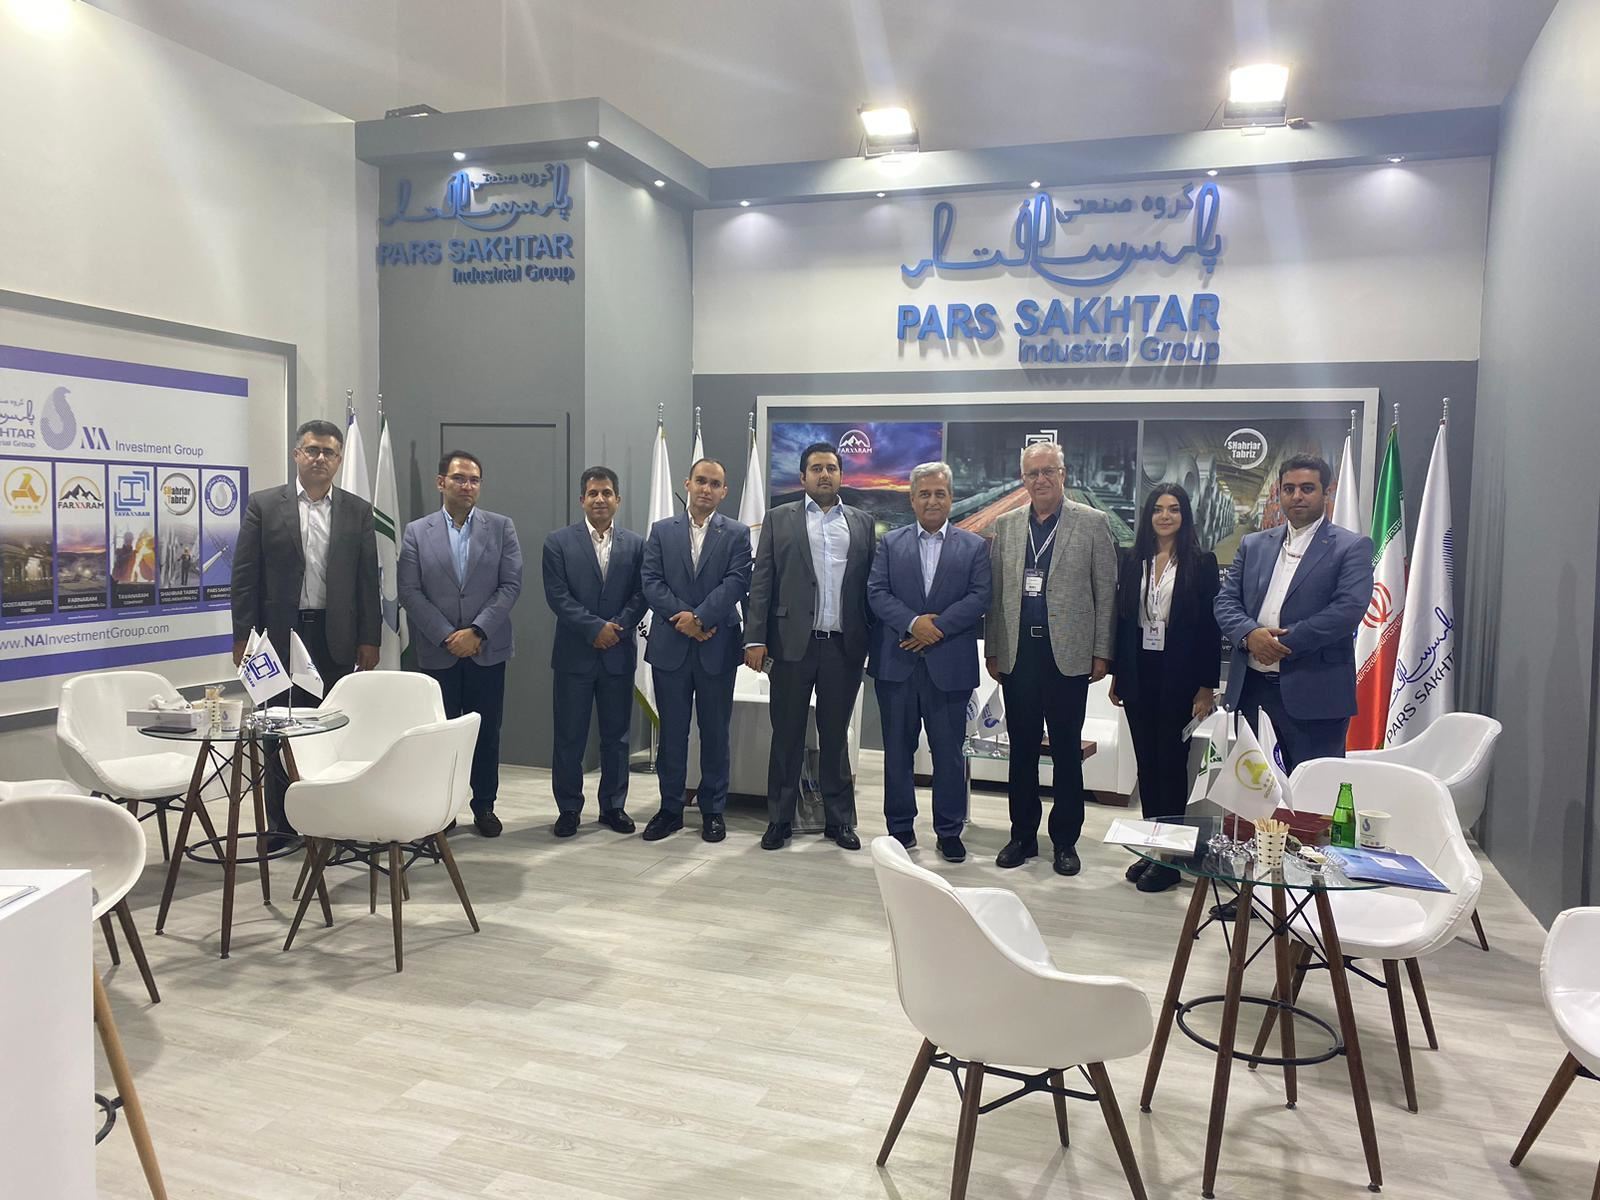 PARS SAKHTAR Co. Welcomed its visitors at Metal Expo